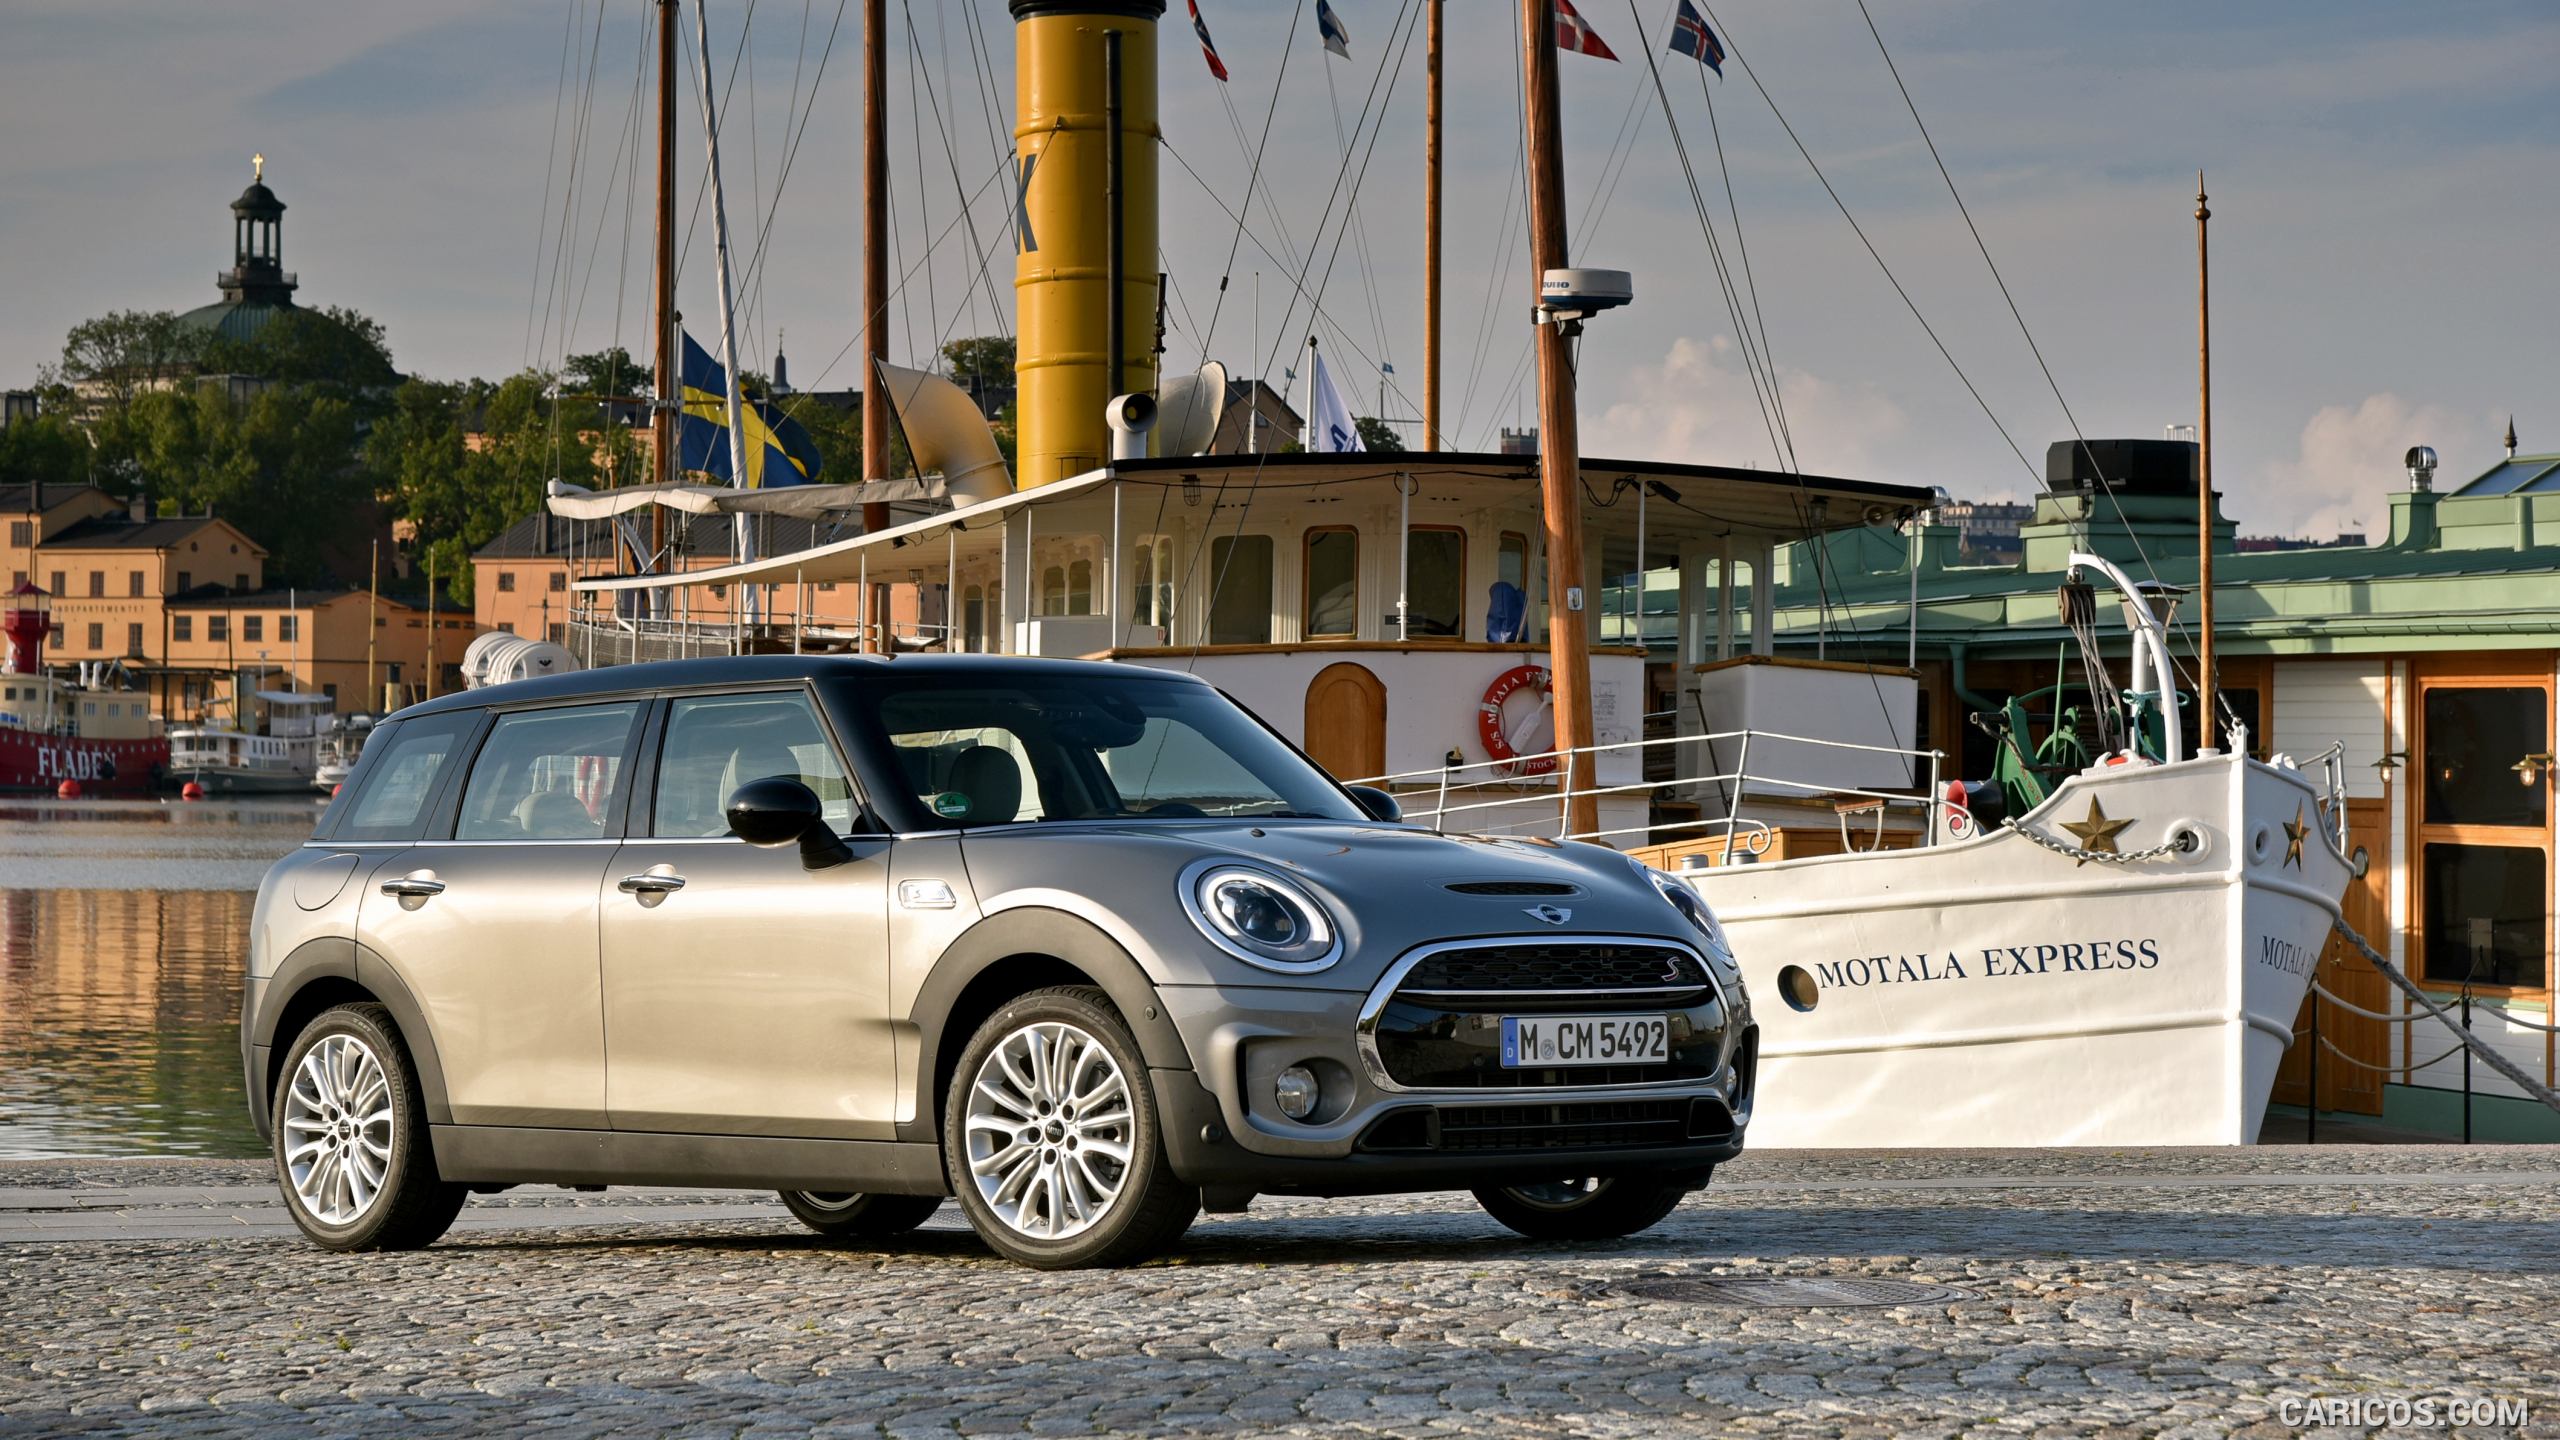 2016 MINI Cooper S Clubman in Metallic Melting Silver - Front, #166 of 380